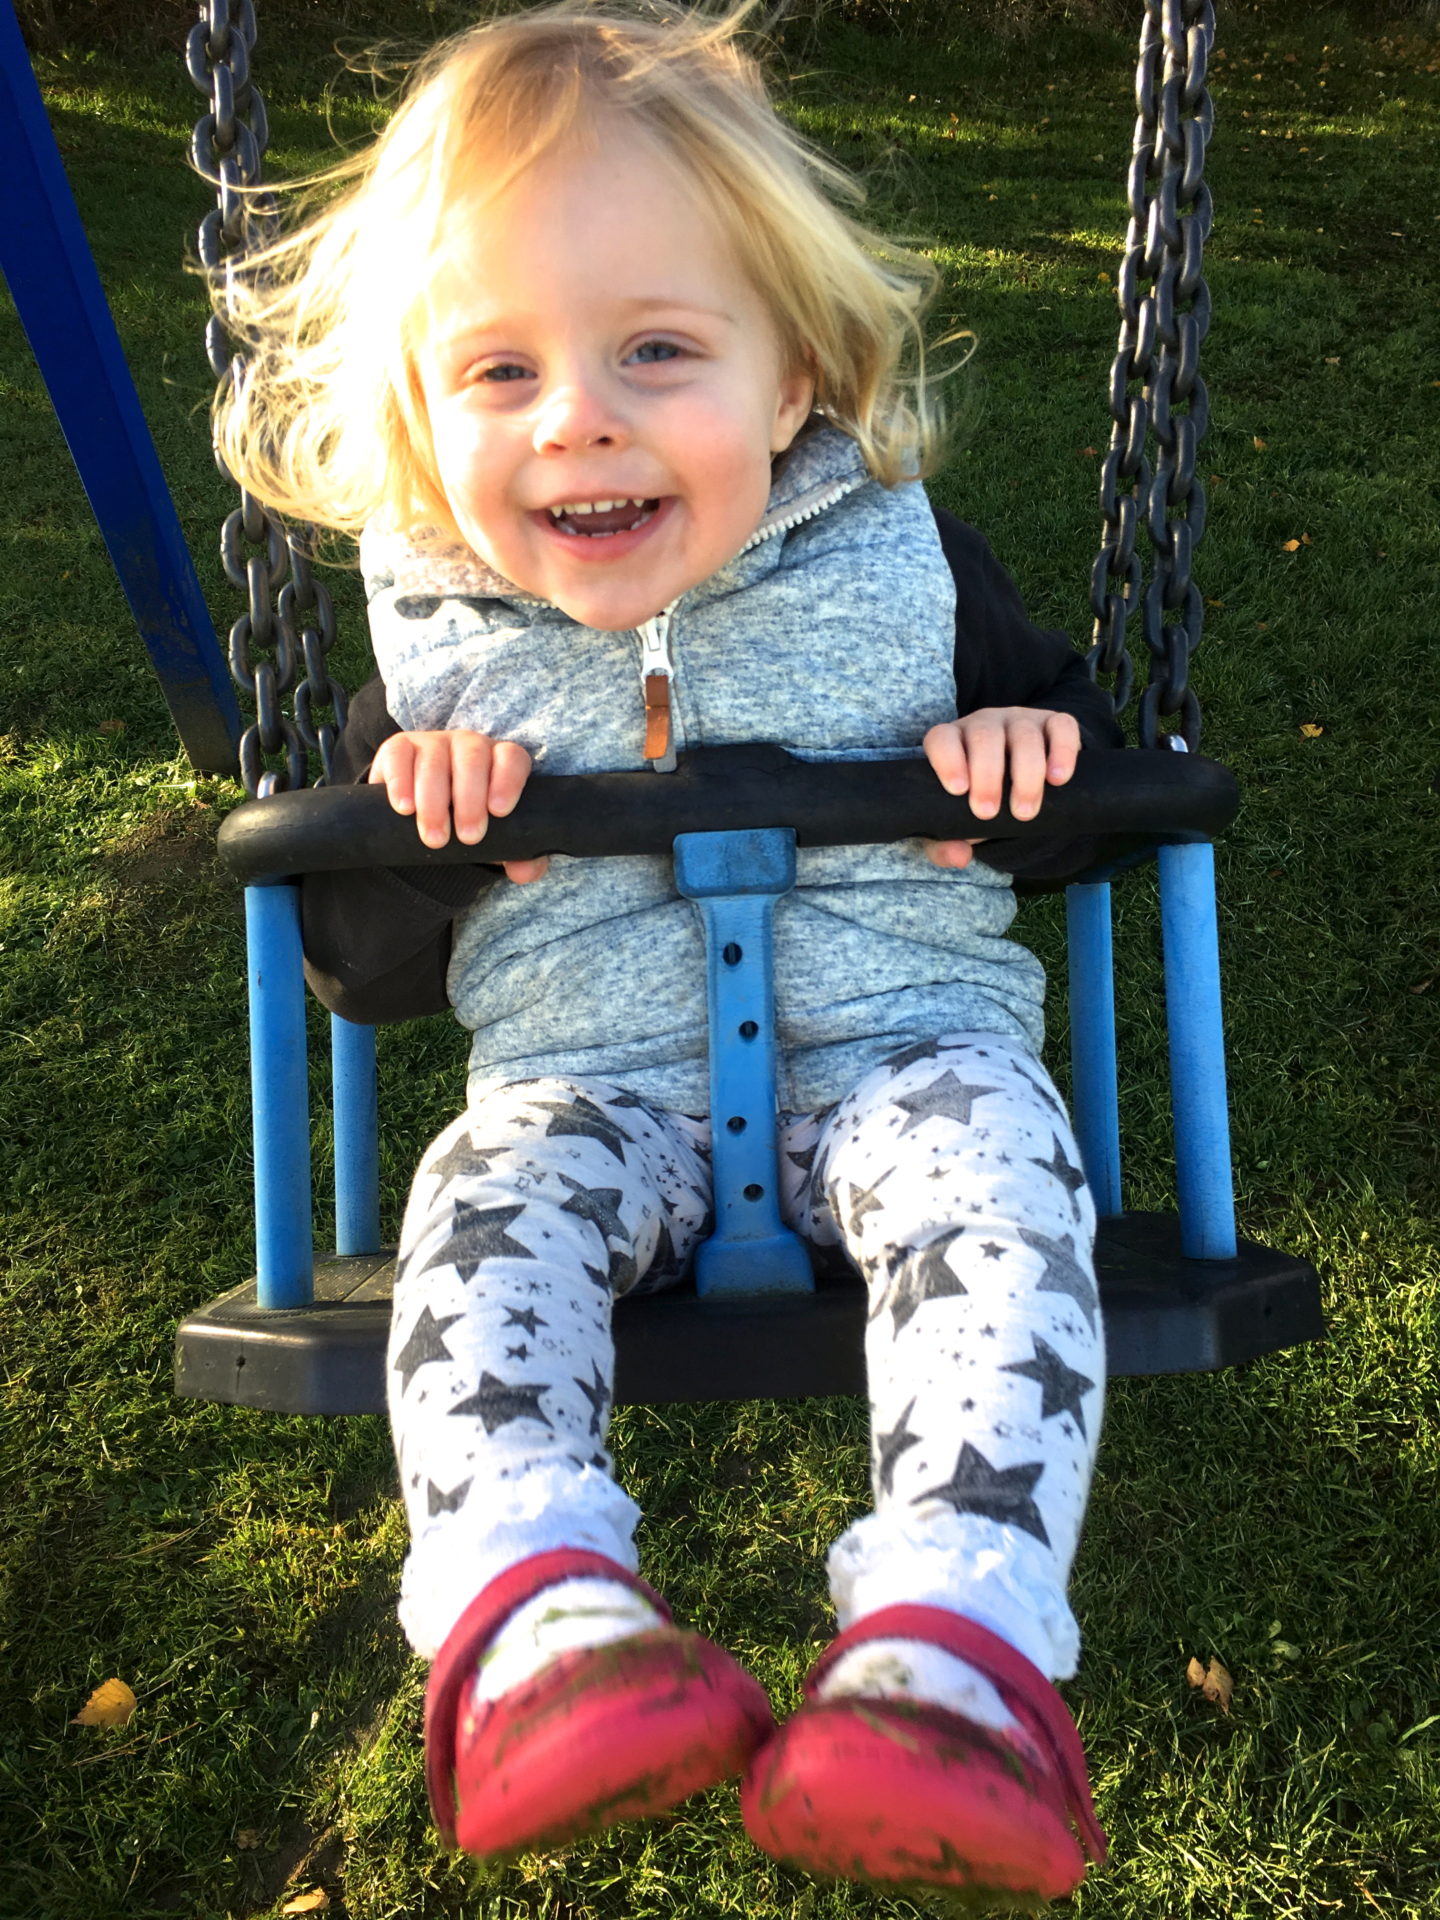 22 months old girl on a swing, smiling